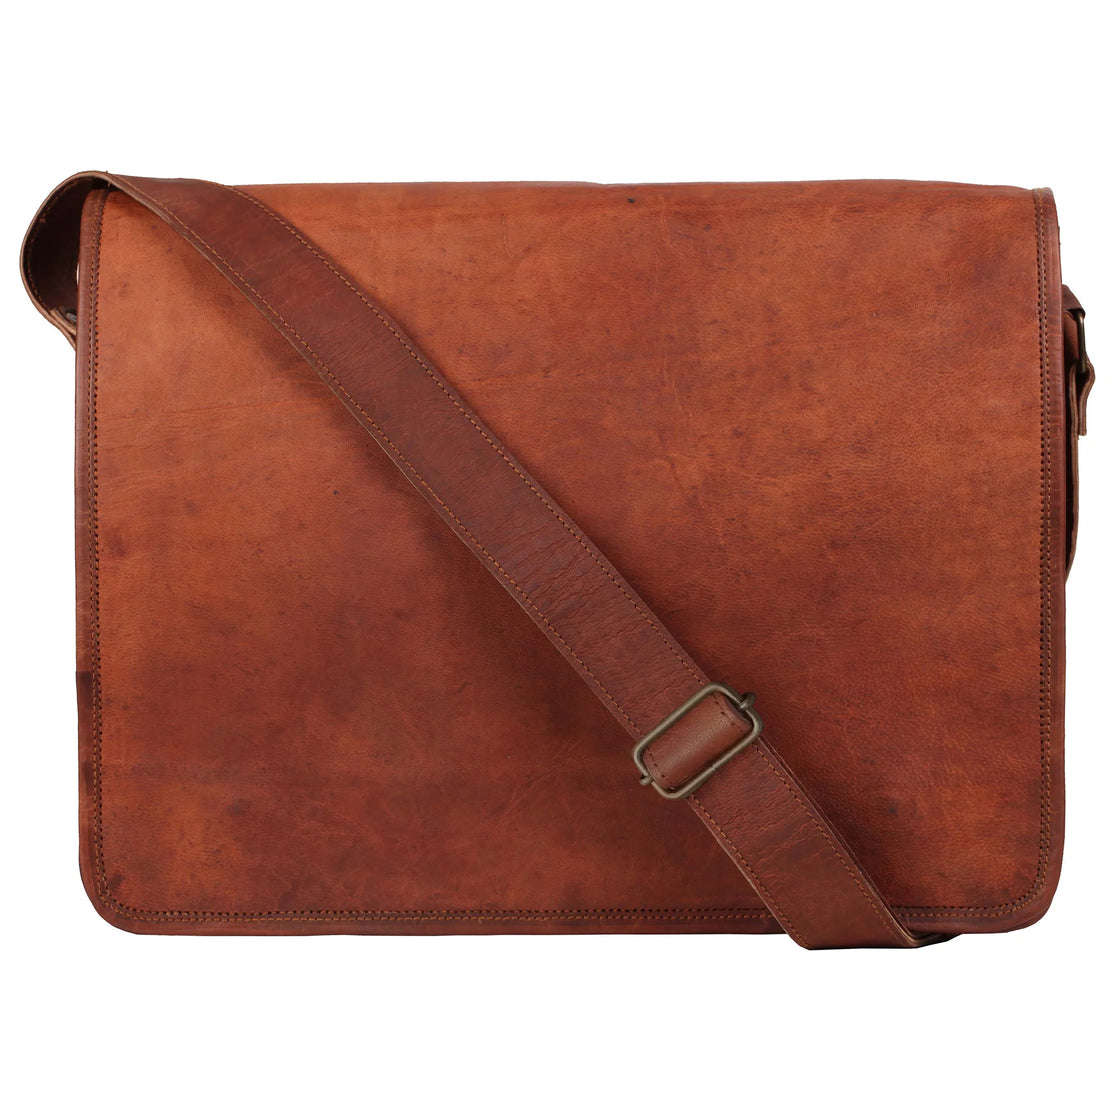 Artisian Leather Messenger Bag Office Bag Satchel (15 inch) – Rustic Town